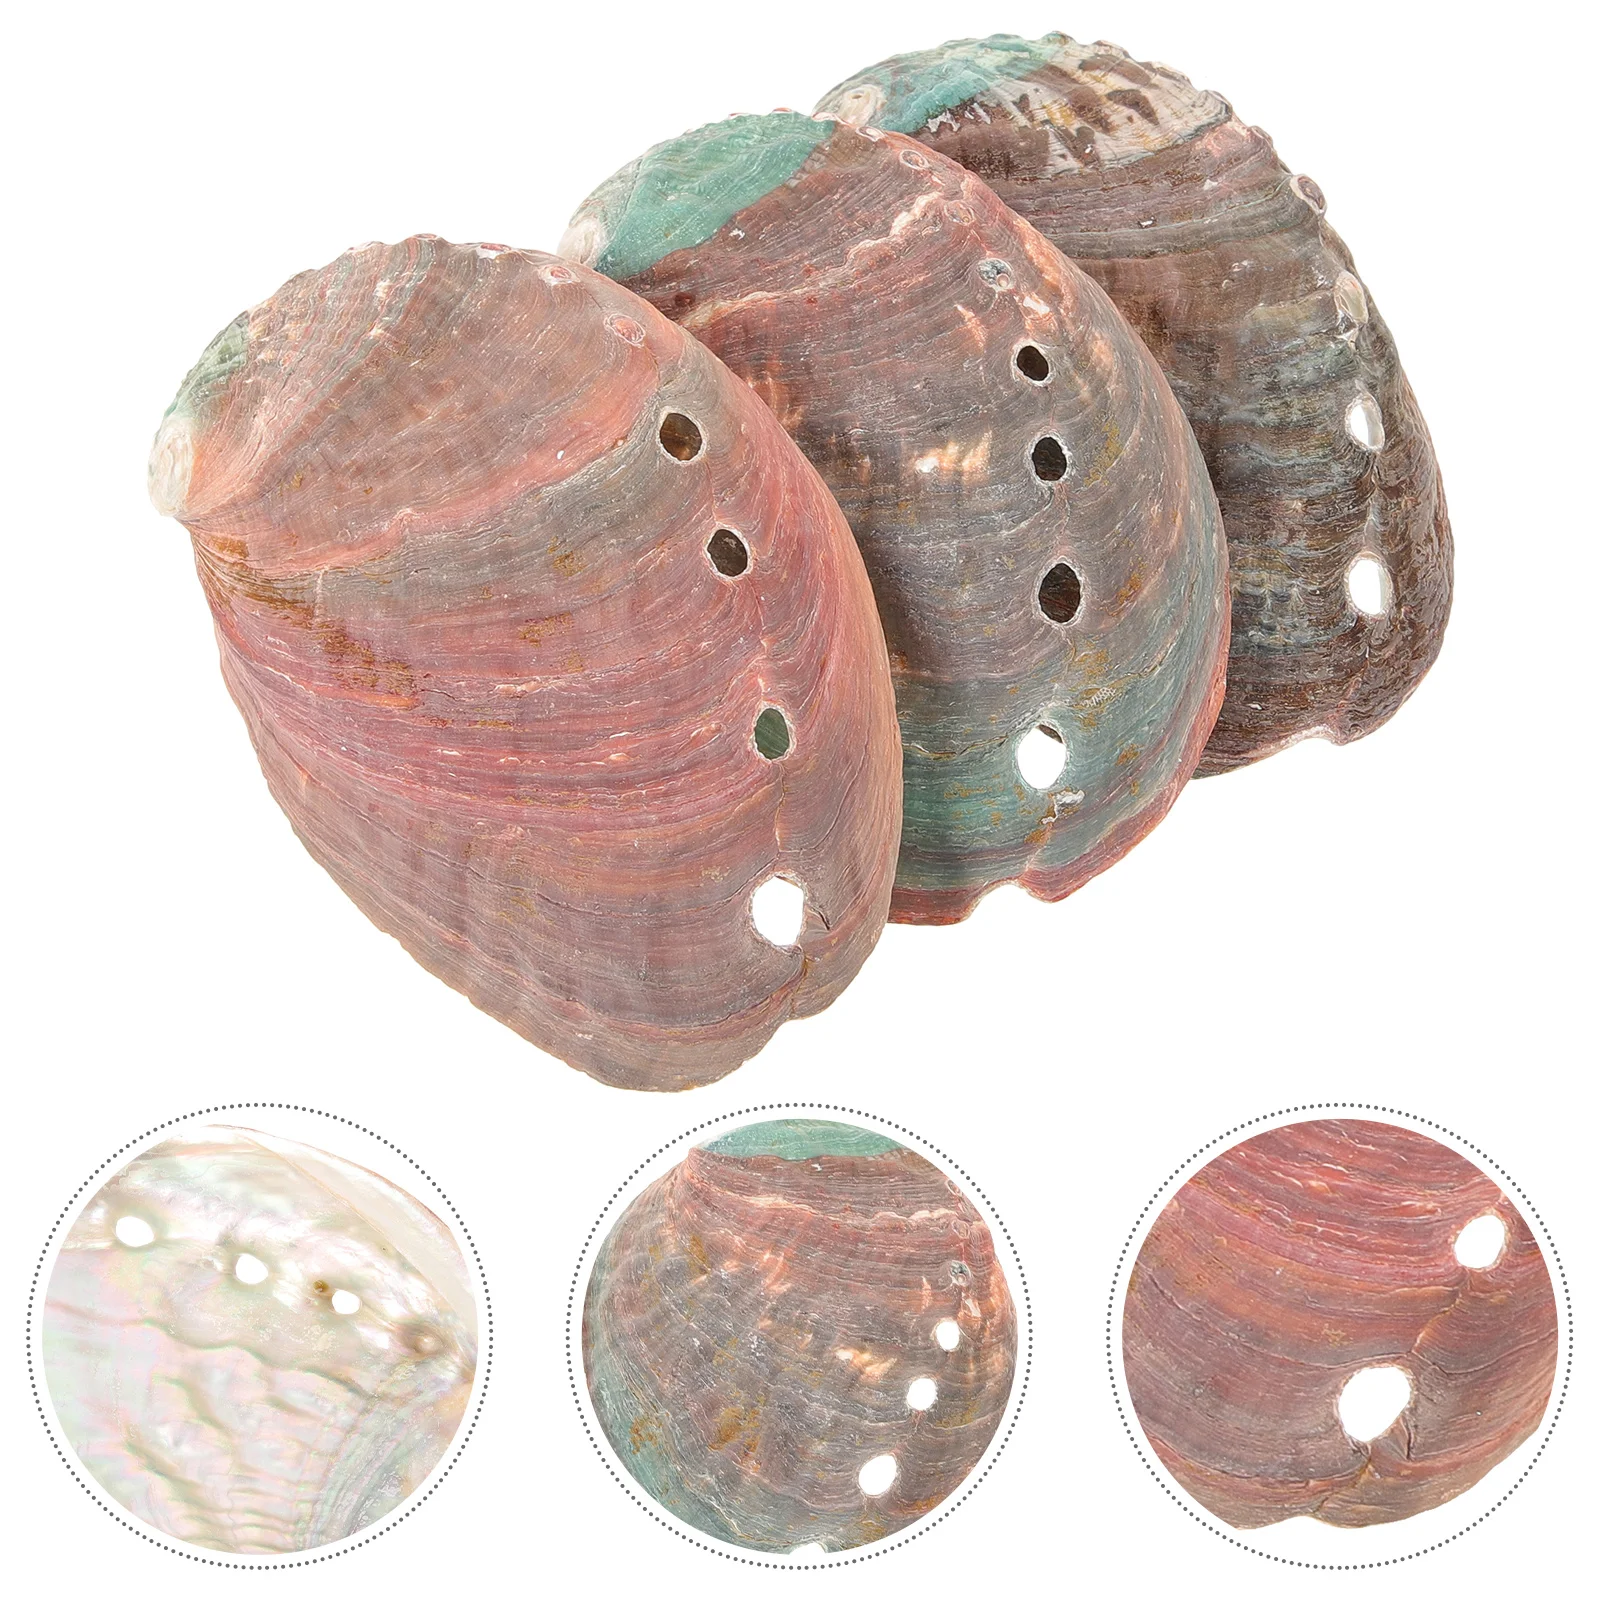 

3 Pcs Abalone Shell Decoration Smudging Fish Tank Kit Conch Offering Holder Smudge Bowl